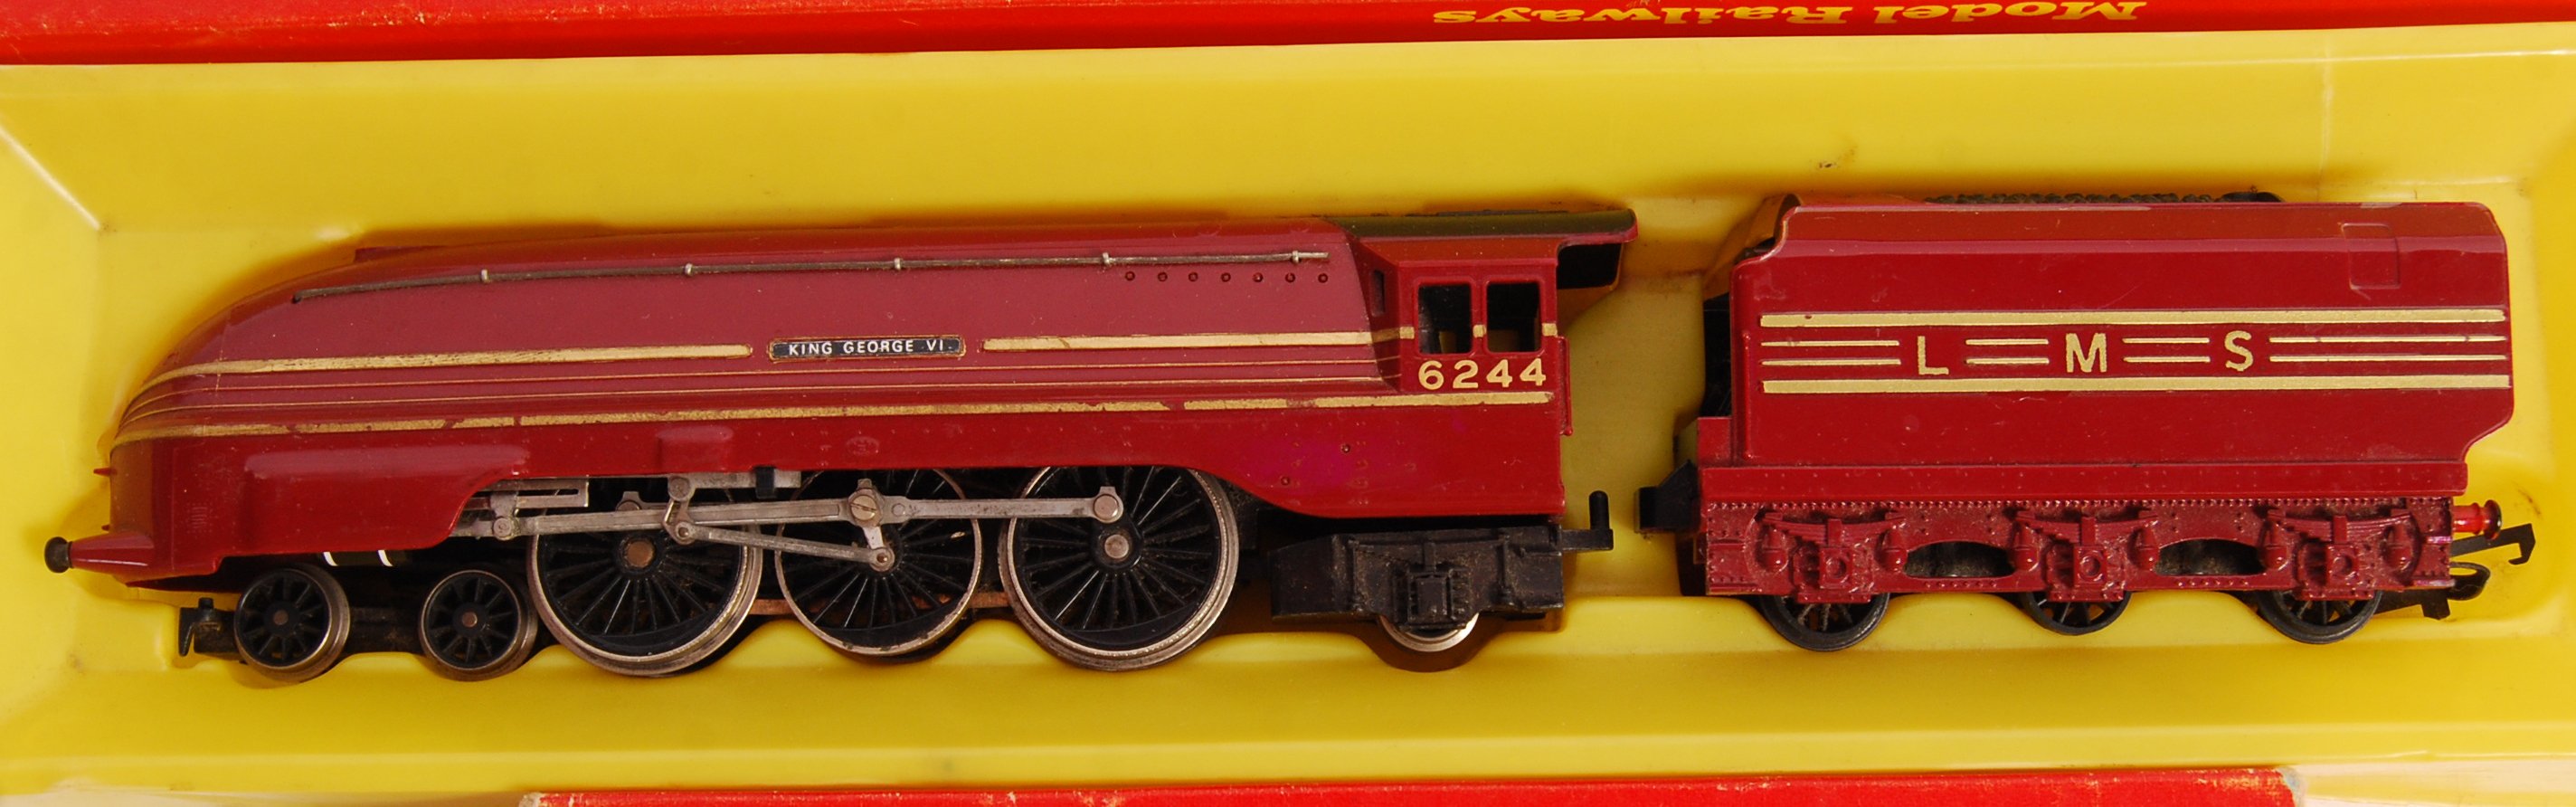 COLLECTION OF HORNBY 00 GAUGE RAILWAY TRAINSET LOCOMOTIVES - Image 3 of 4